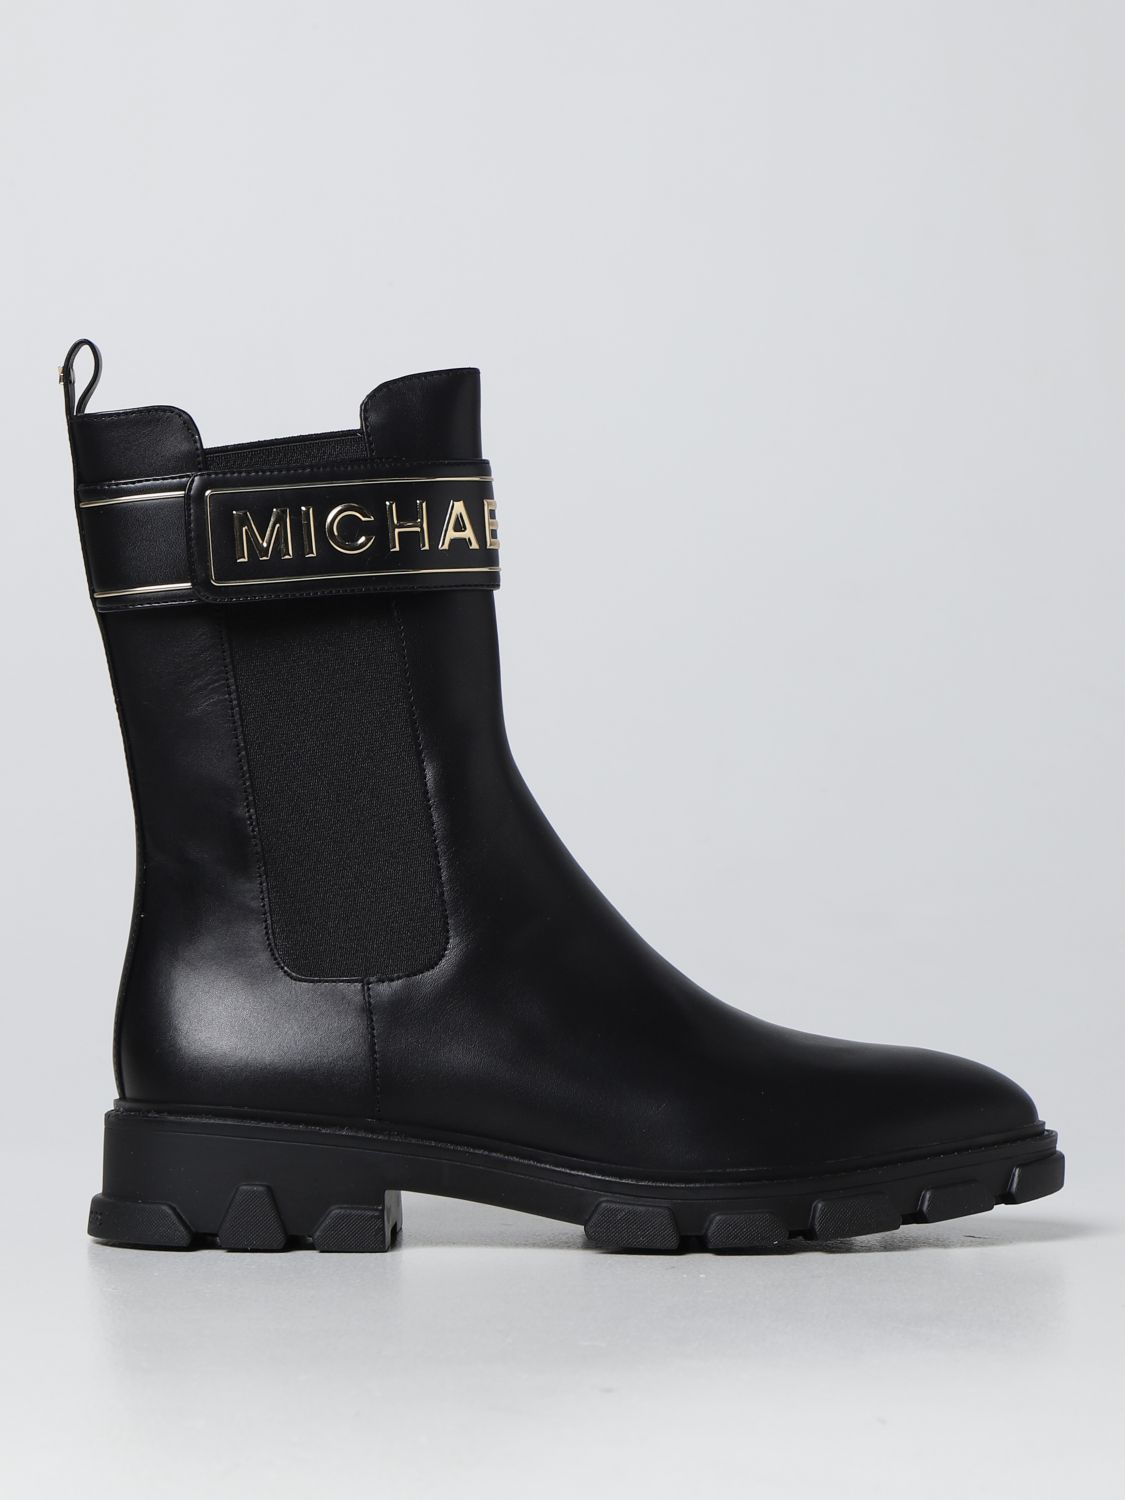 Total 56+ imagen michael kors leather boots - Abzlocal.mx